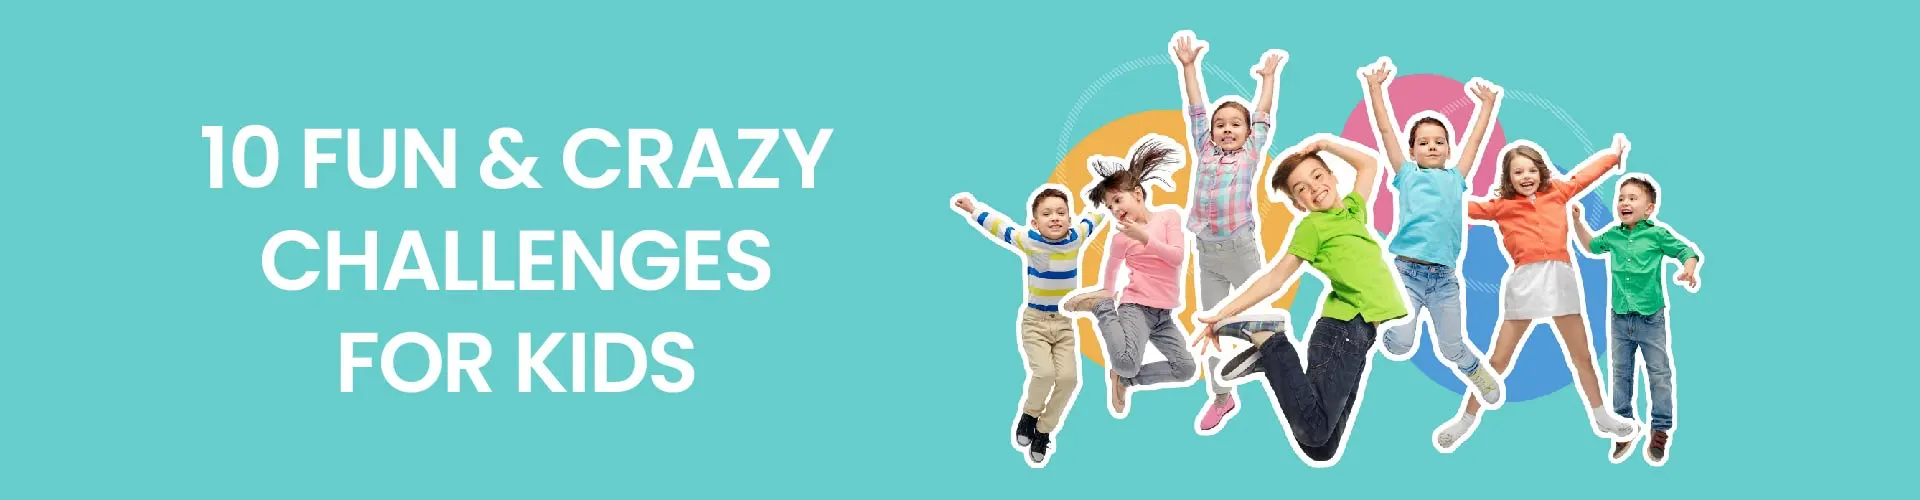 10 fun and crazy challenges for kids